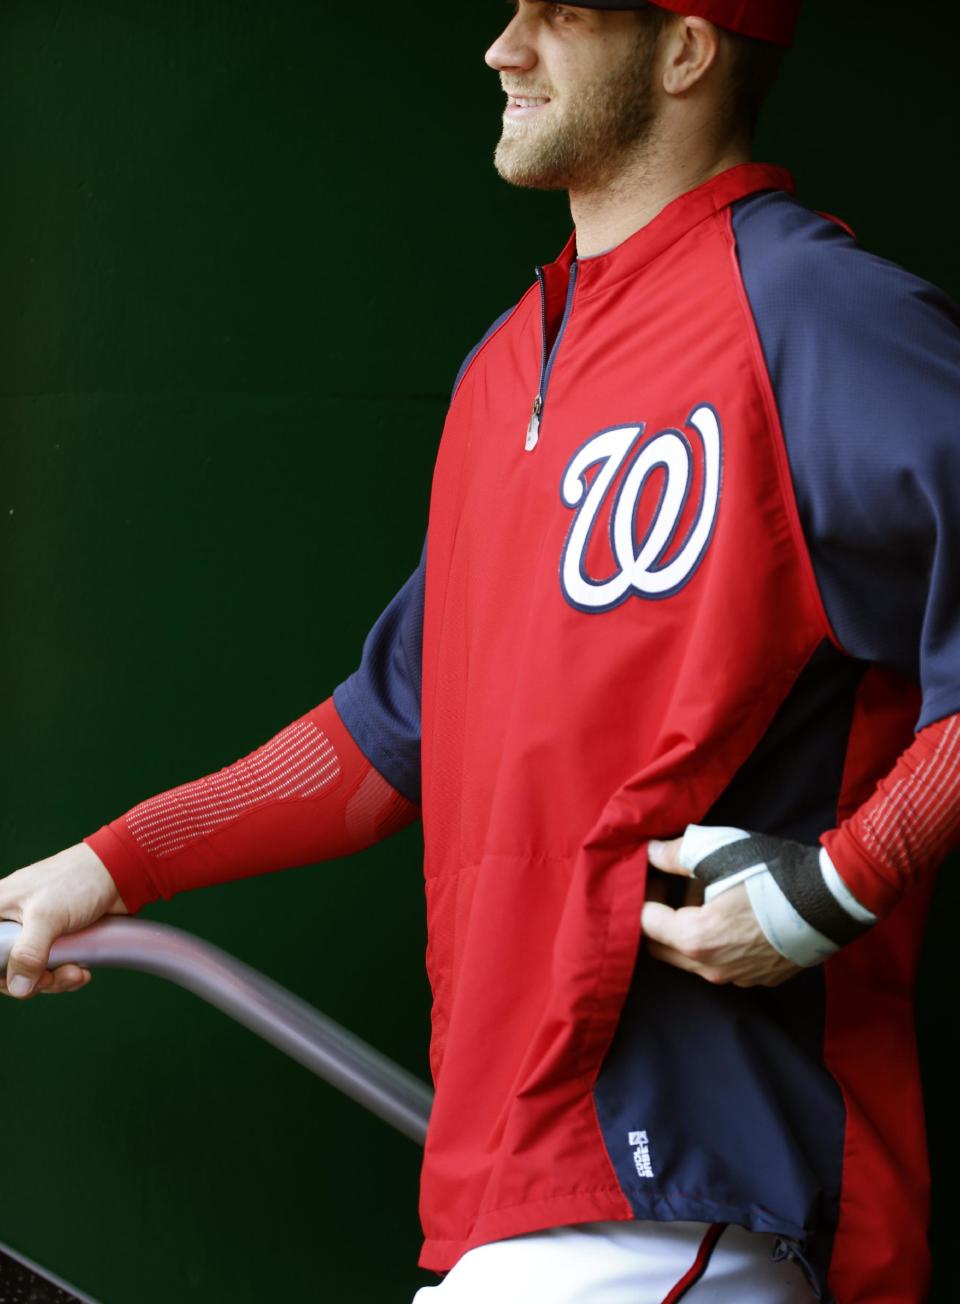 CORRECTS TO LEFT HAND, NOT RIGHT - Washington Nationals left fielder Bryce Harper stands in the dugout with a bandage on his left hand during the fifth inning of a baseball game against the San Diego Padres at Nationals Park Saturday, April 26, 2014, in Washington. Harper injured the hand Friday and is not in the lineup Saturday. (AP Photo/Alex Brandon)